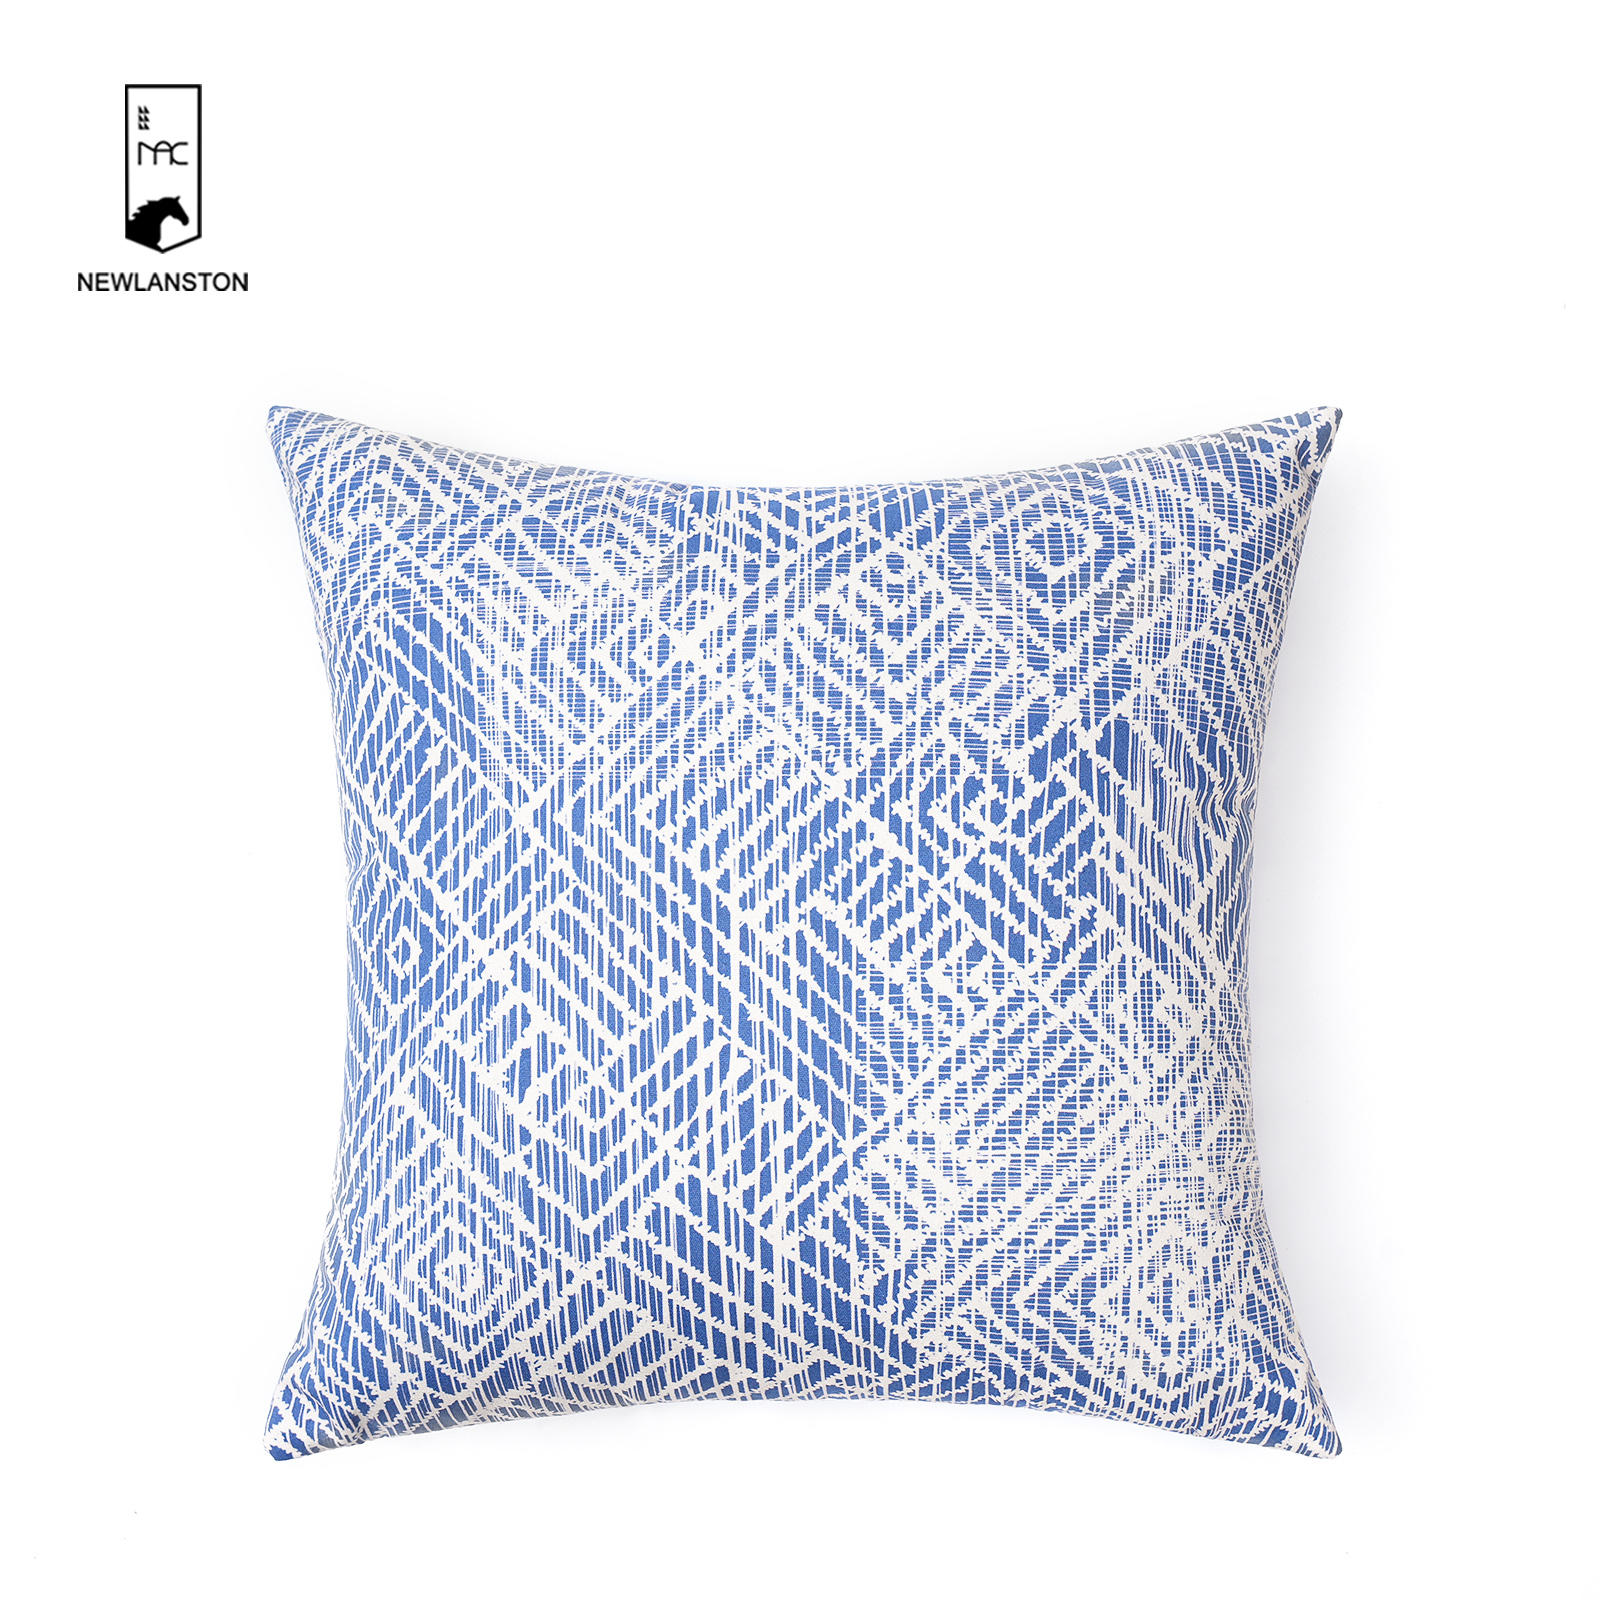 45x45 Digital printed recycled cotton Geometric Cushion cover 